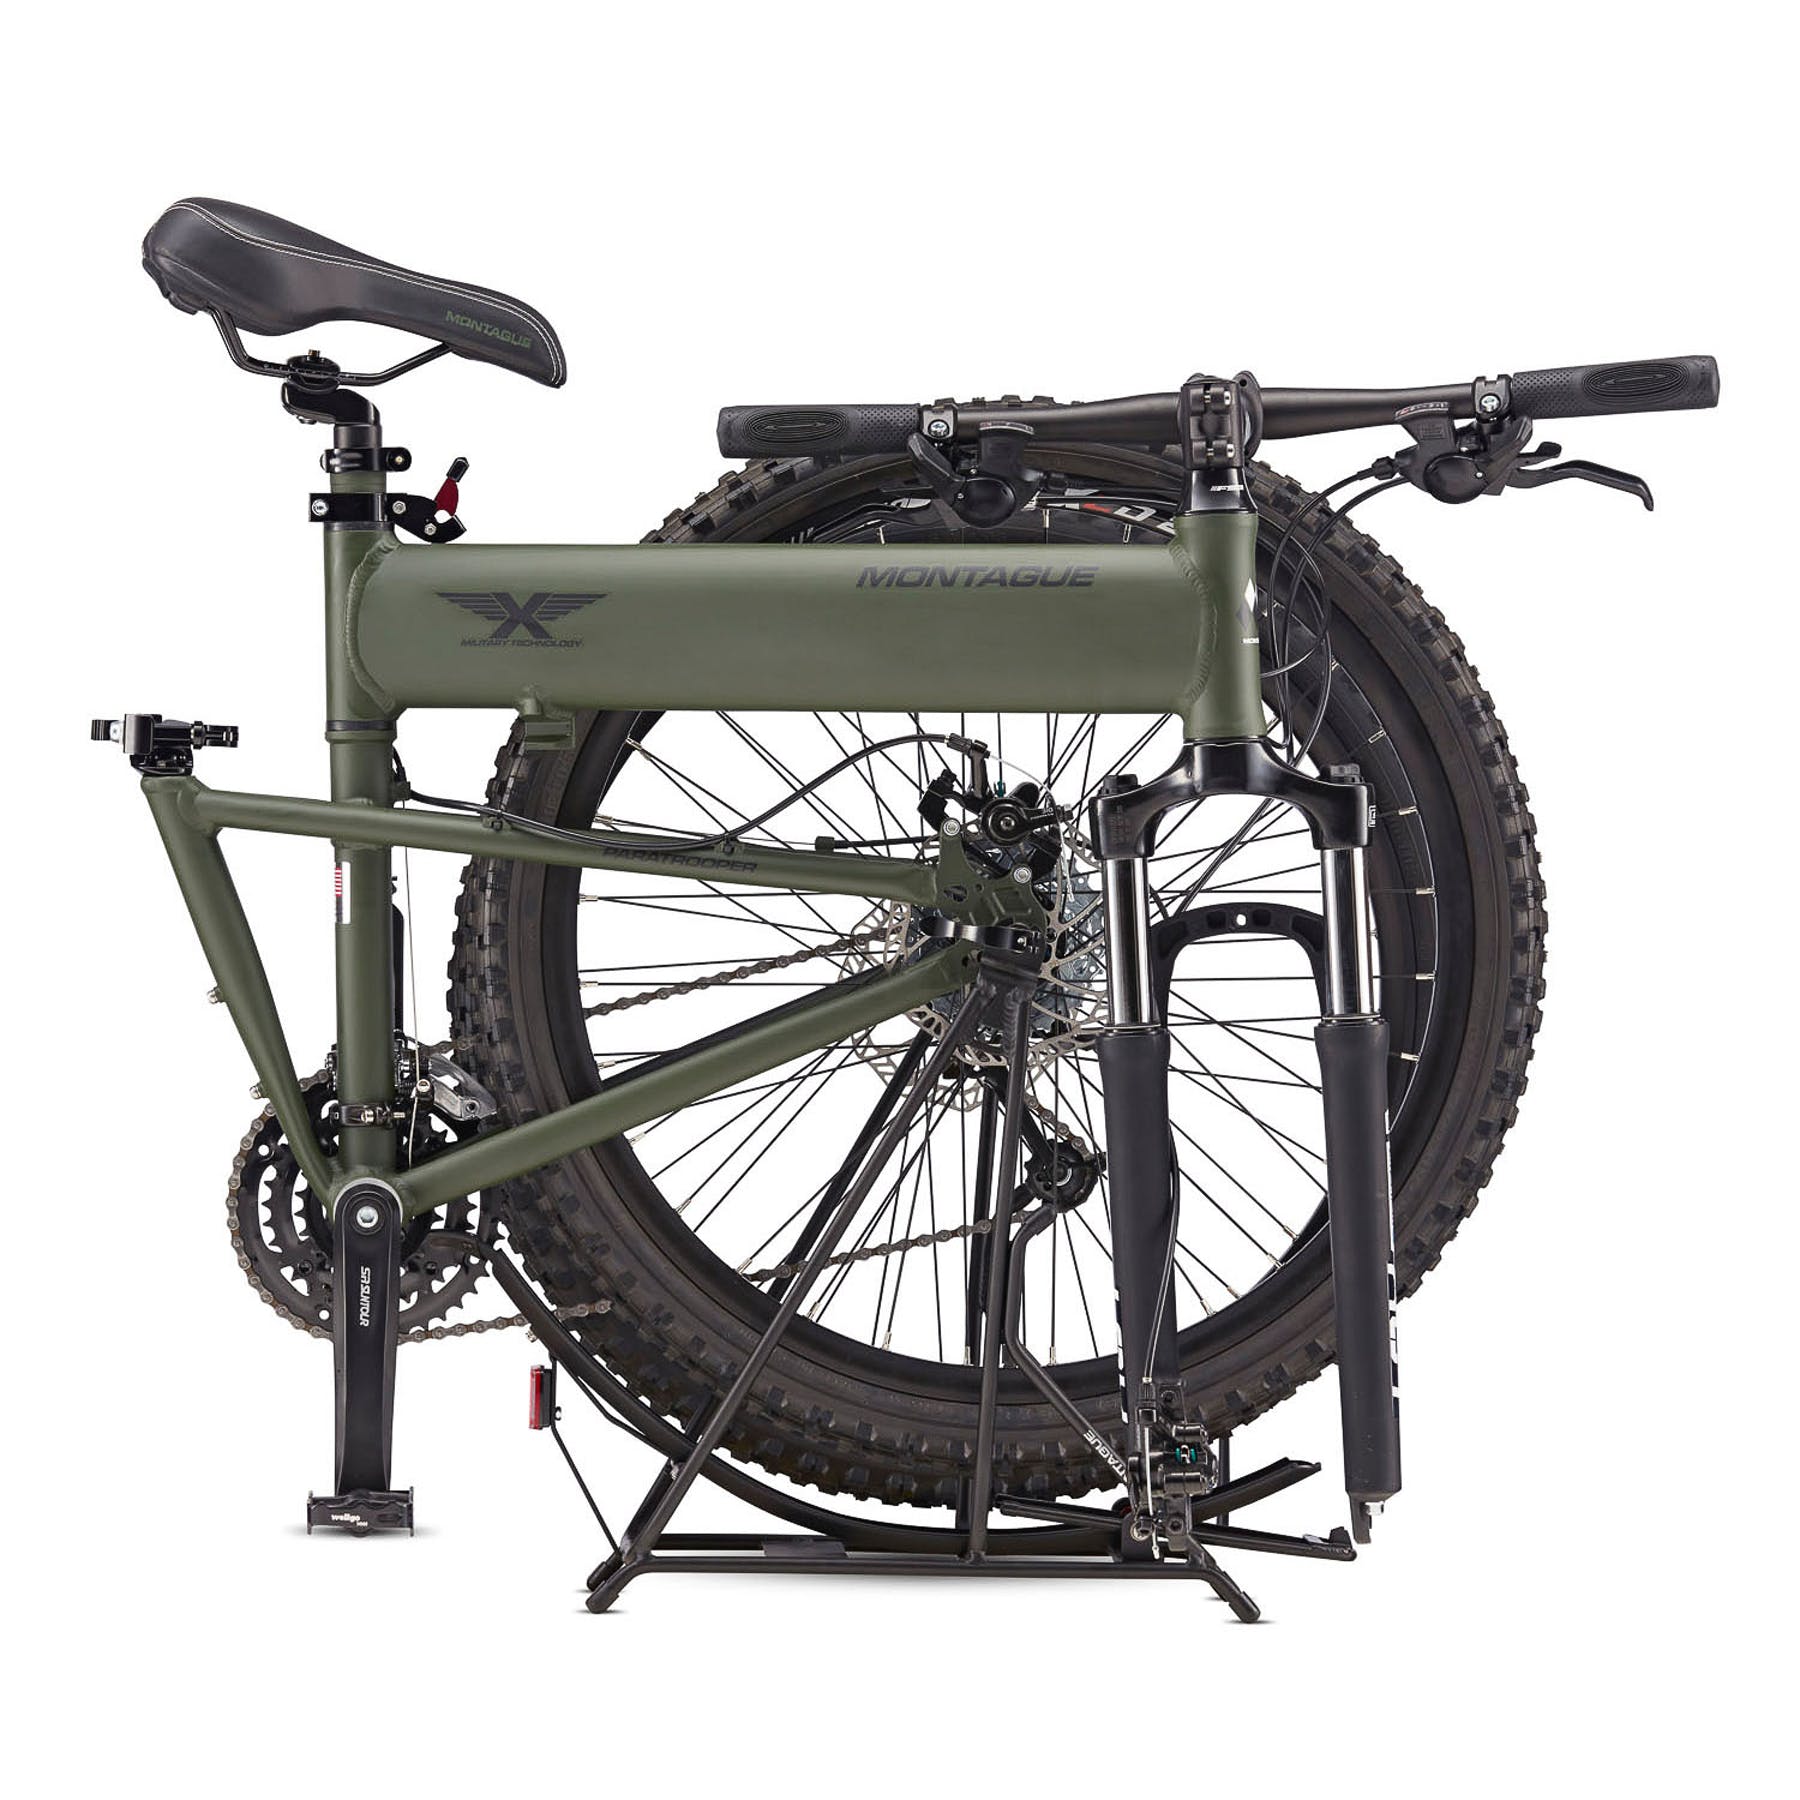 Foldable bikes that are great for storage